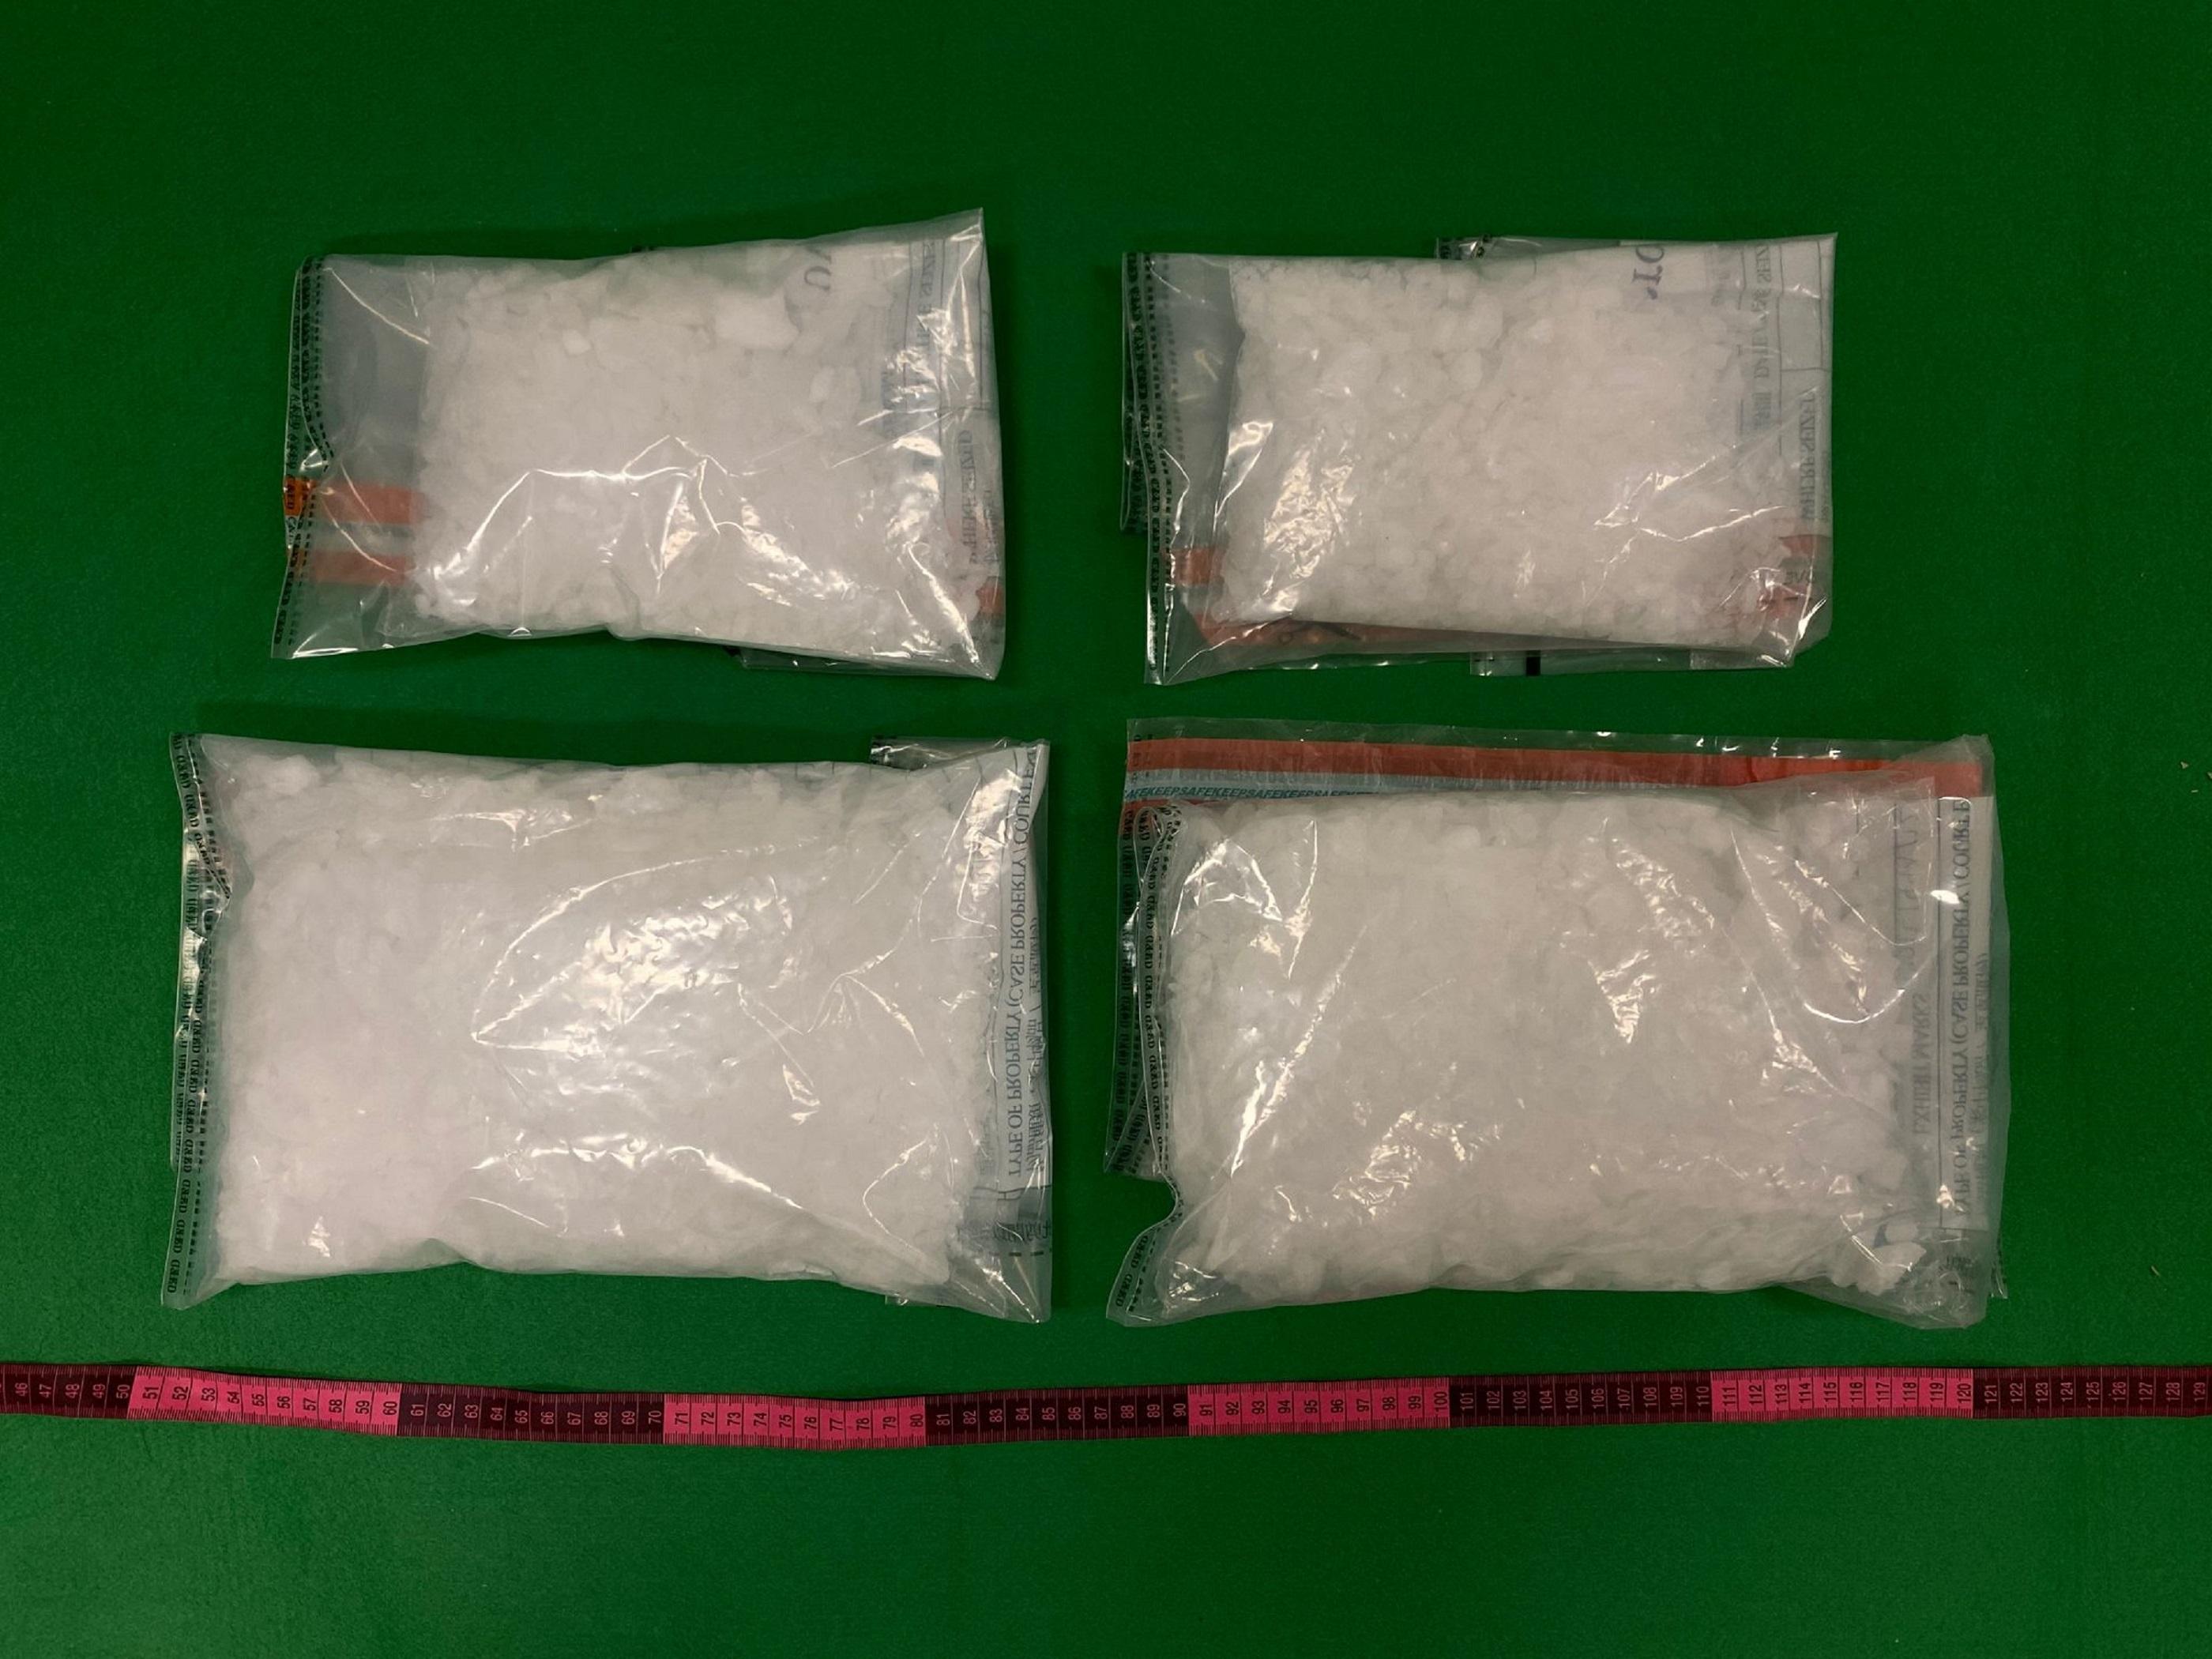 Hong Kong Customs detected three dangerous drugs cases at Hong Kong International Airport in the past two days (October 24 and 25) and seized about 30 kilograms of suspected ketamine, about 3kg of suspected methamphetamine and about 500 grams of suspected cocaine, with a total estimated market value of about $20 million. Photo shows the suspected methamphetamine seized.